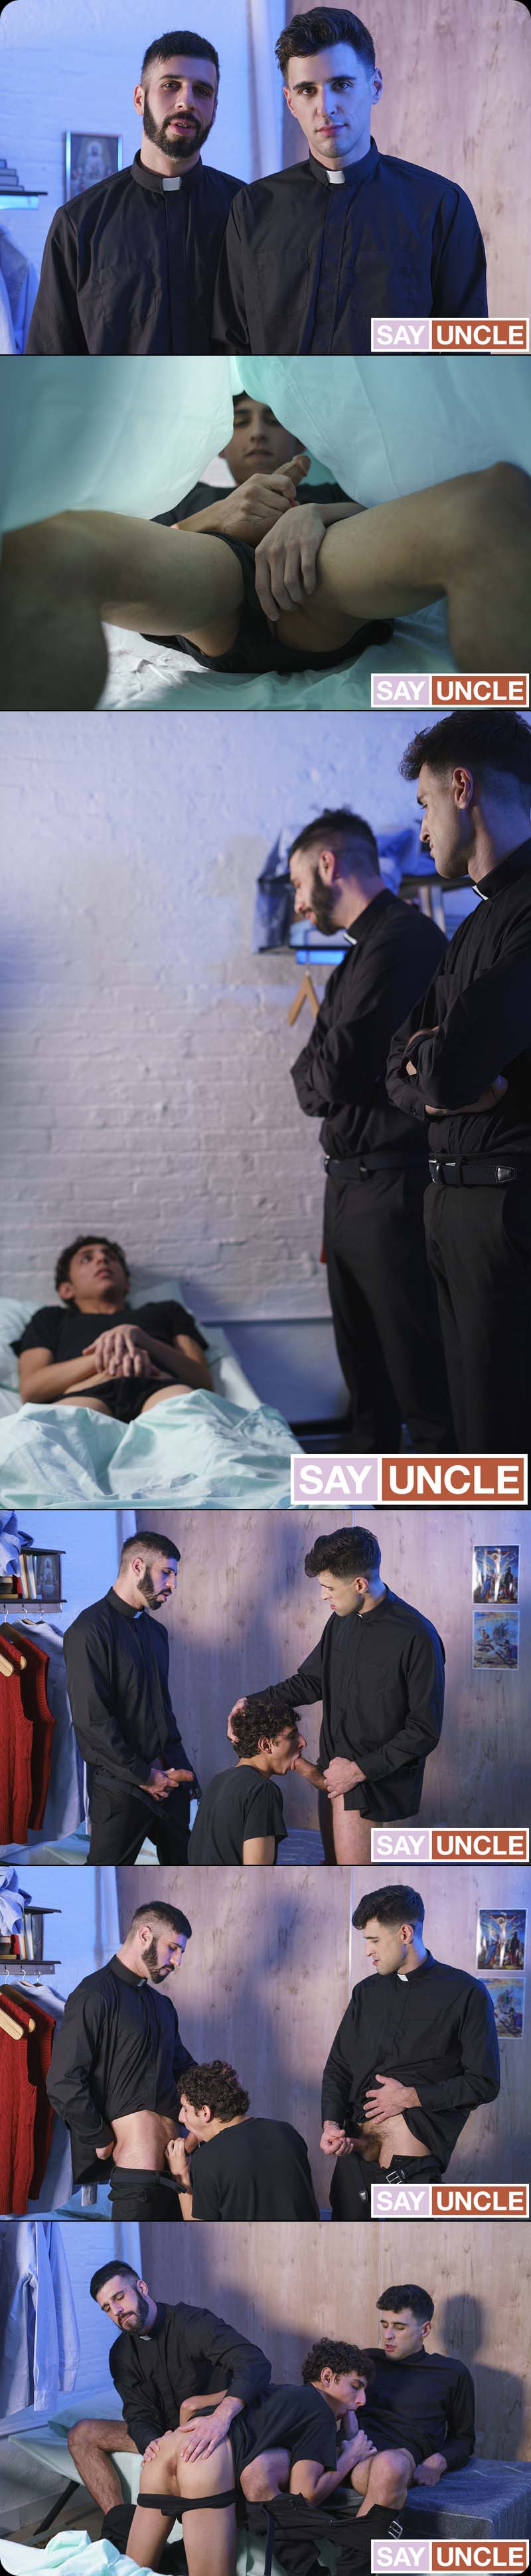 In The Dormitory (Father Romeo and Father Gallo Tag-Team Carter Ford) at YesFather.com